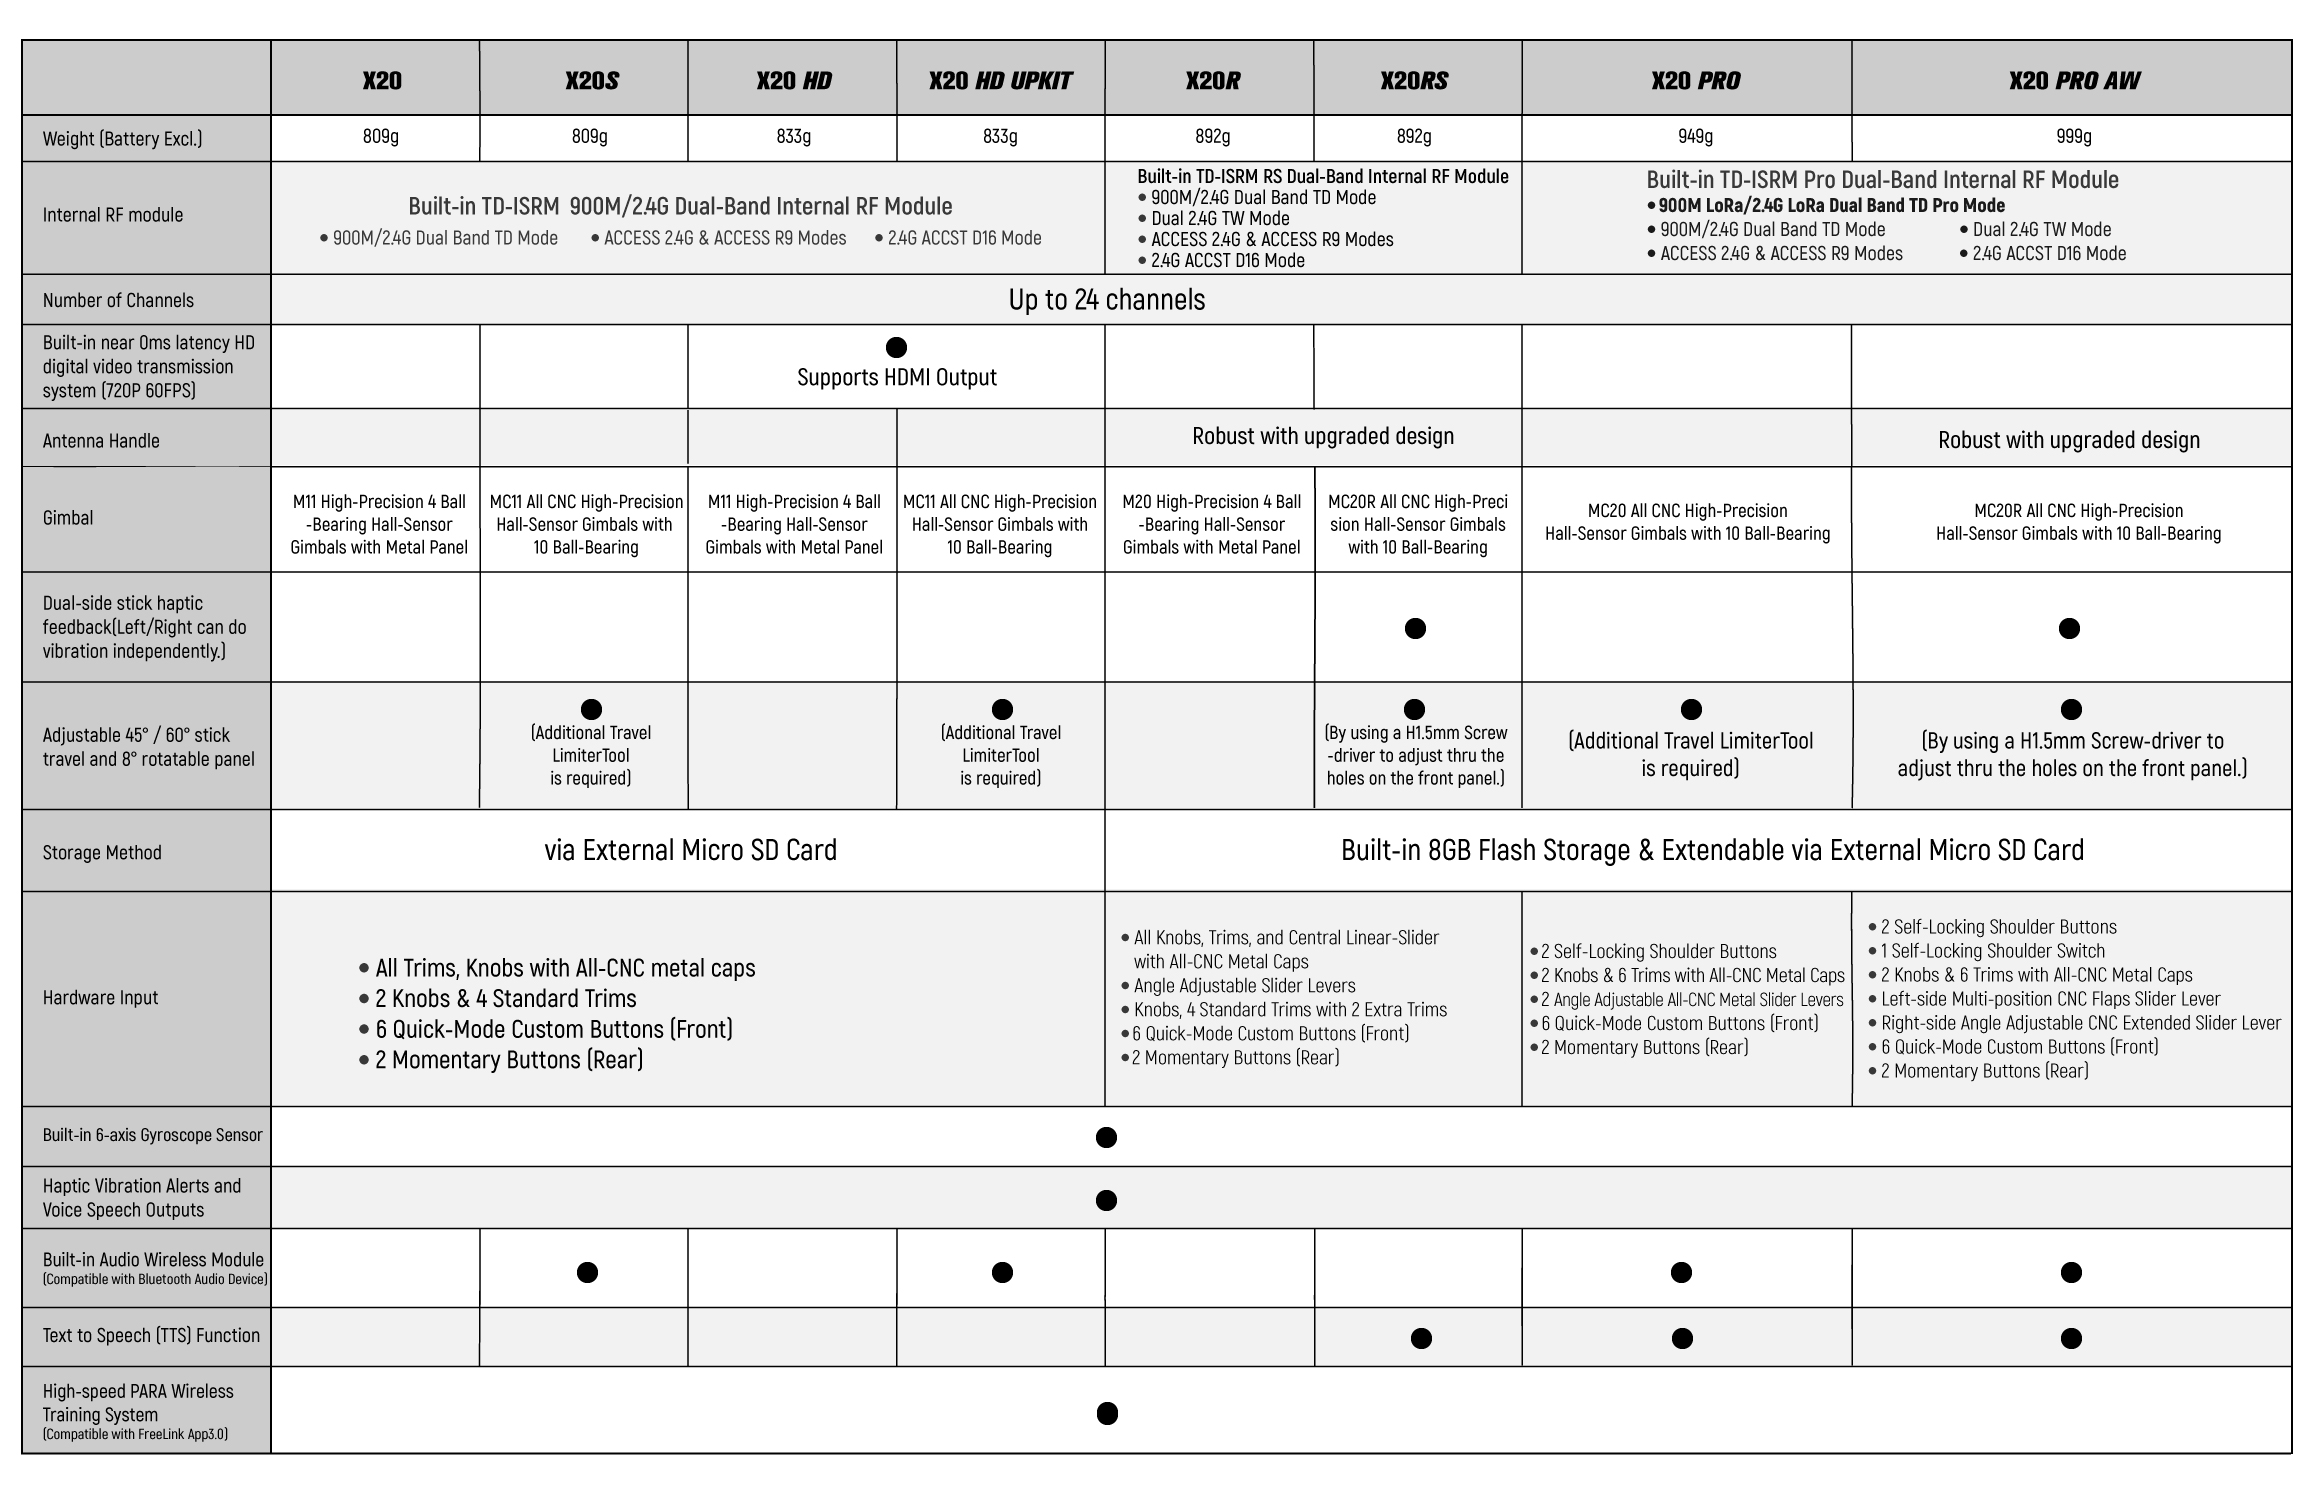 Comparison table of specifications and functions of FrSky X20 Series Radios